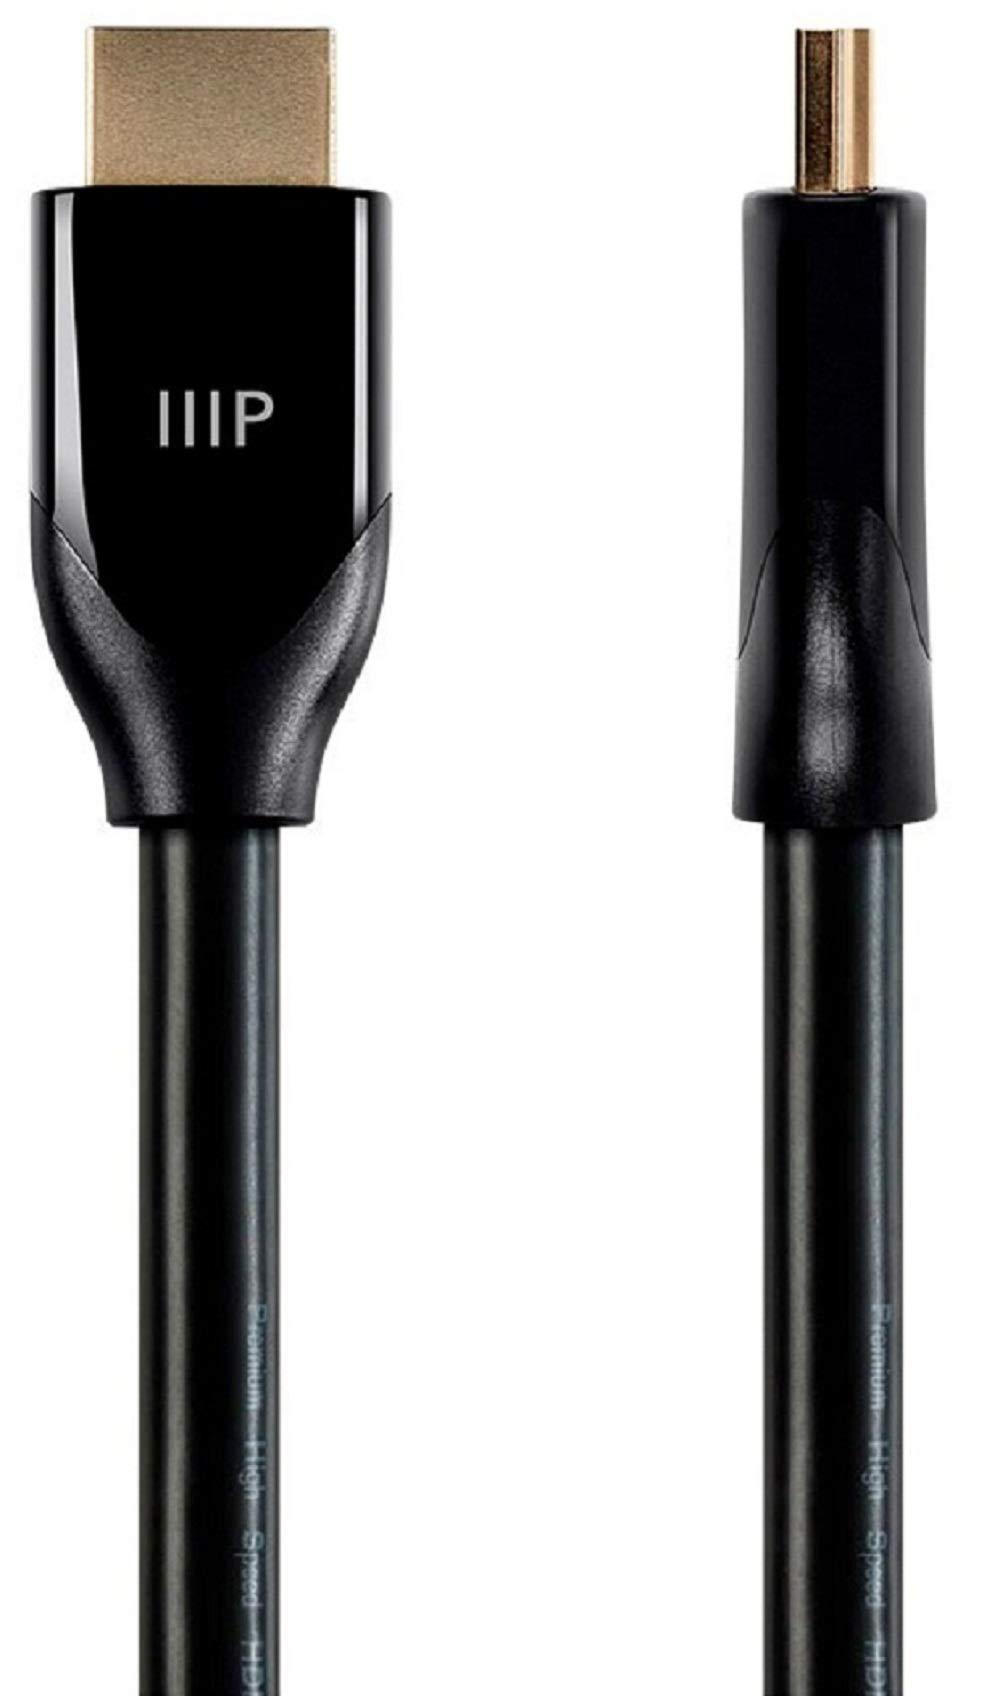 Monoprice Certified Premium HDMI Cable - Black - 30 Feet | 4K@60Hz, HDR, 18Gbps, 24AWG, YUV 4:4:4